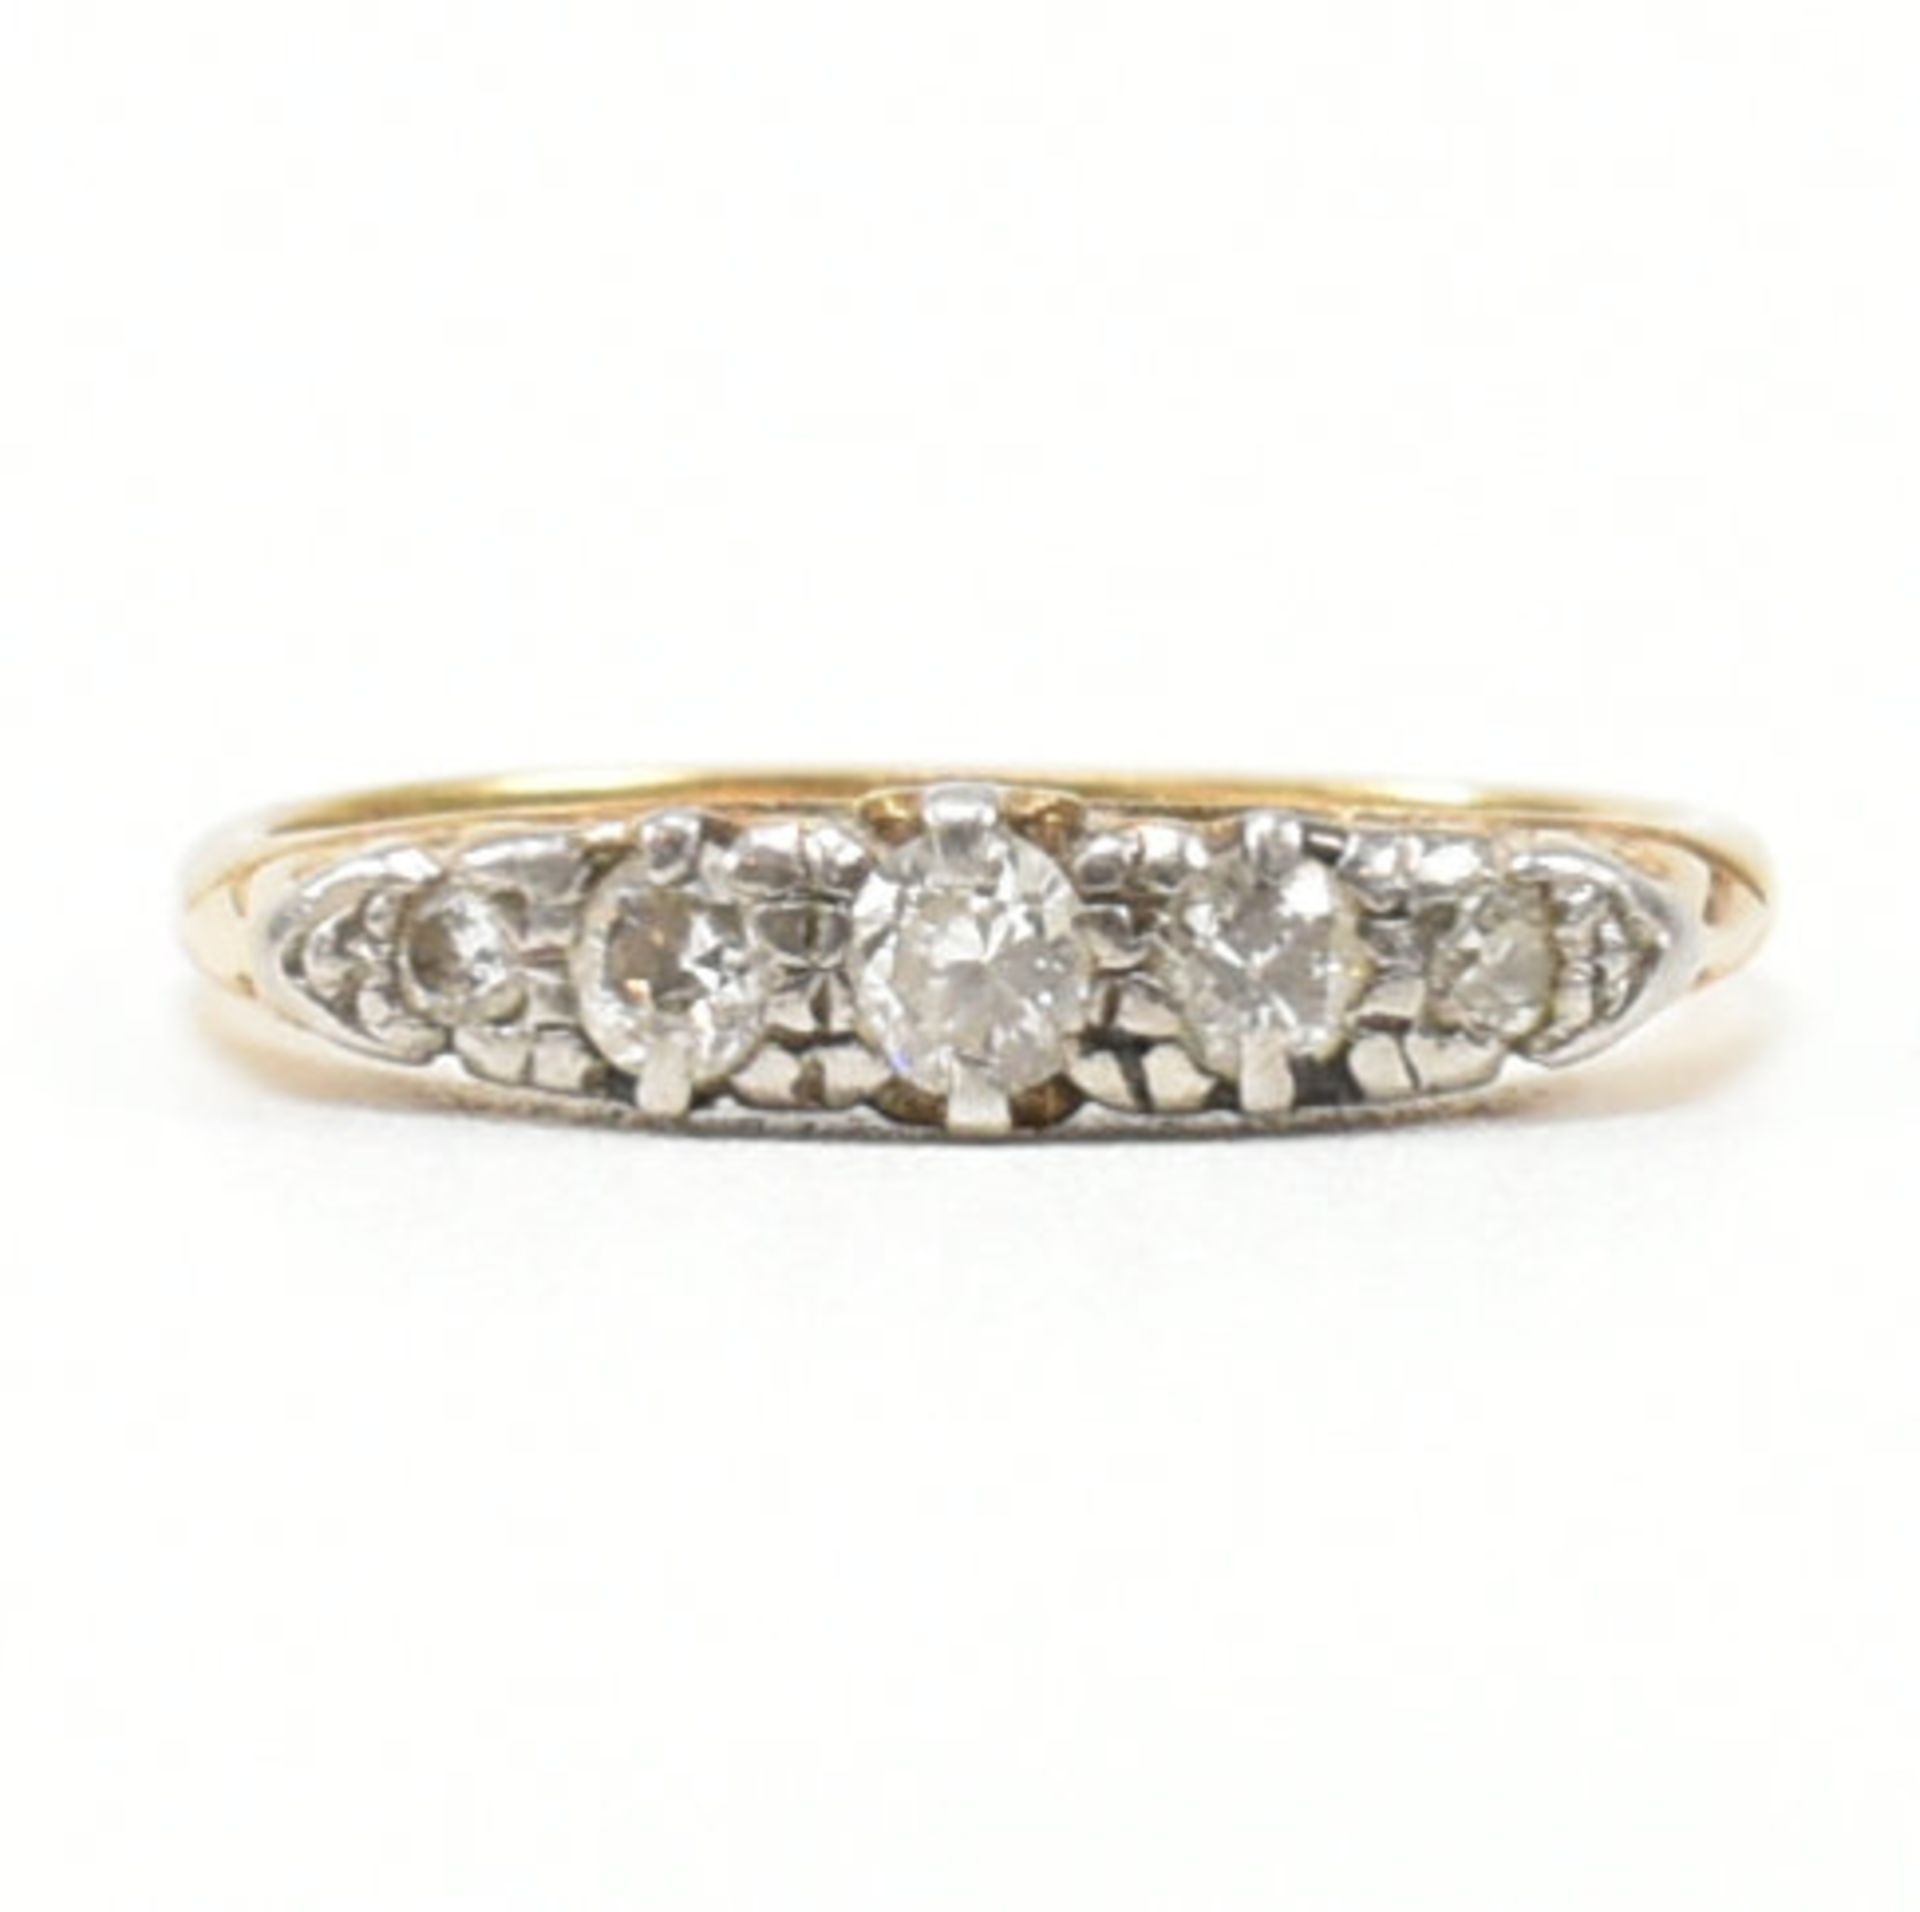 18CT GOLD & DIAMOND FIVE STONE RING - Image 11 of 12